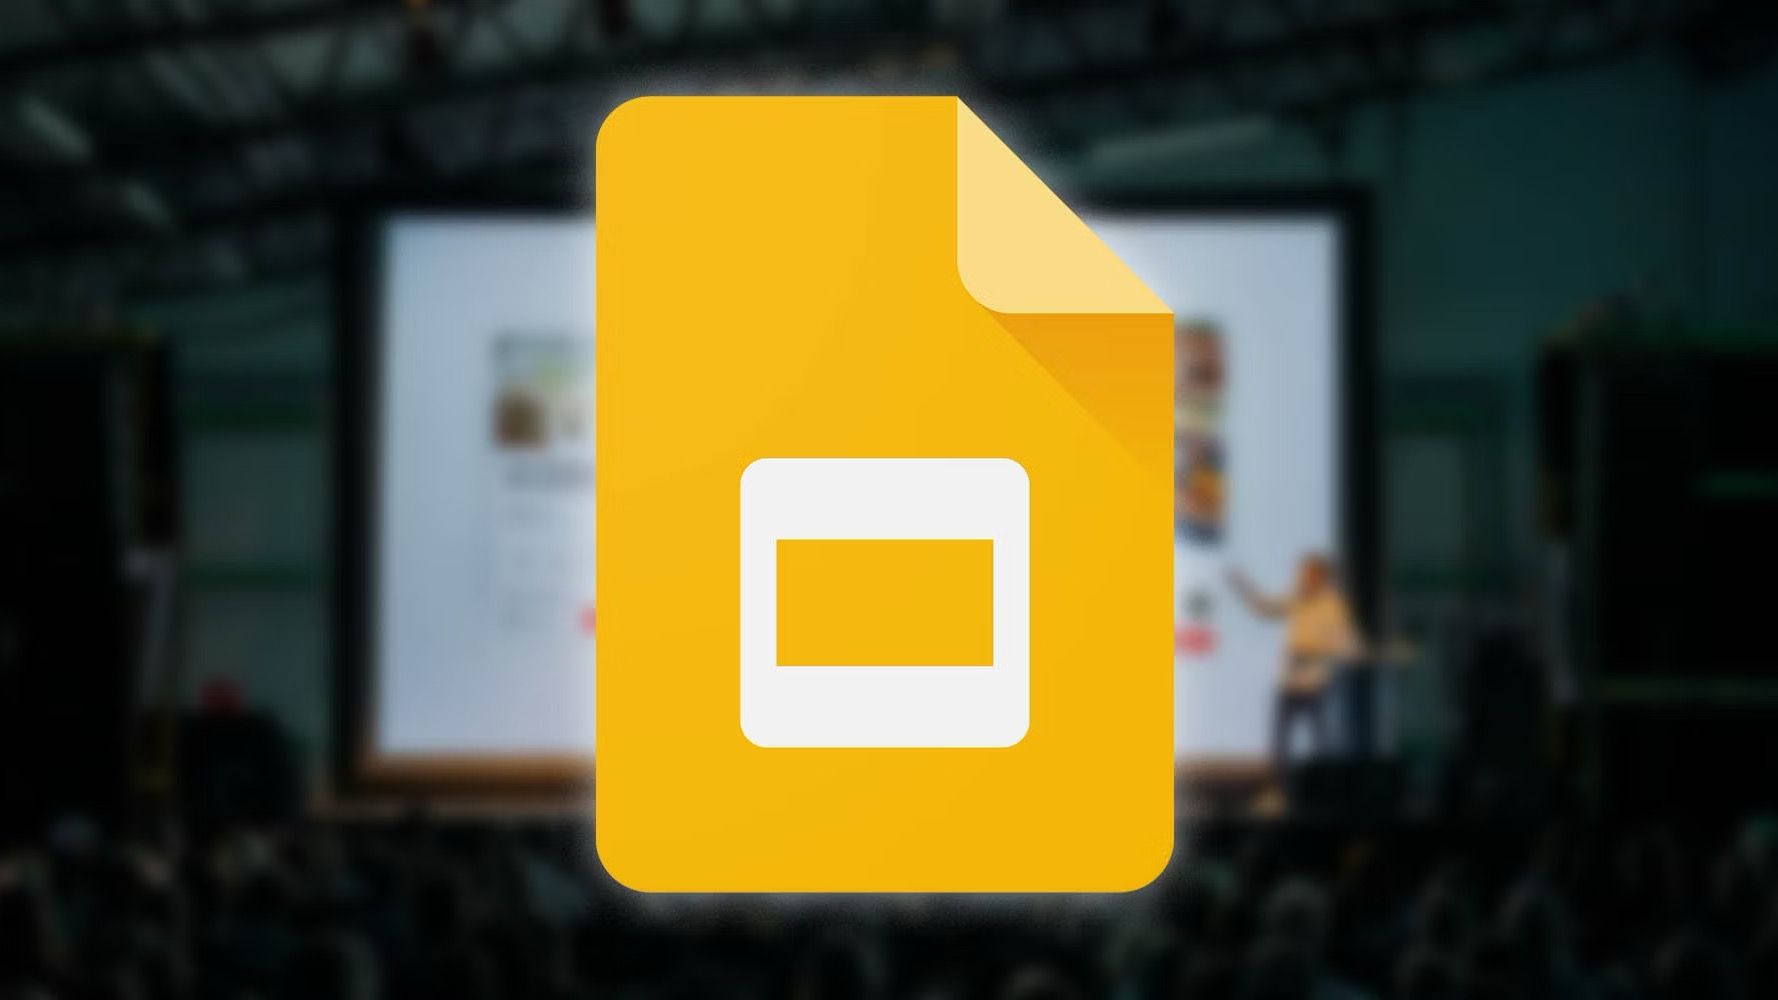 Google Slides yellow logo icon printed over blurry background showing presentation, audience, and speaker